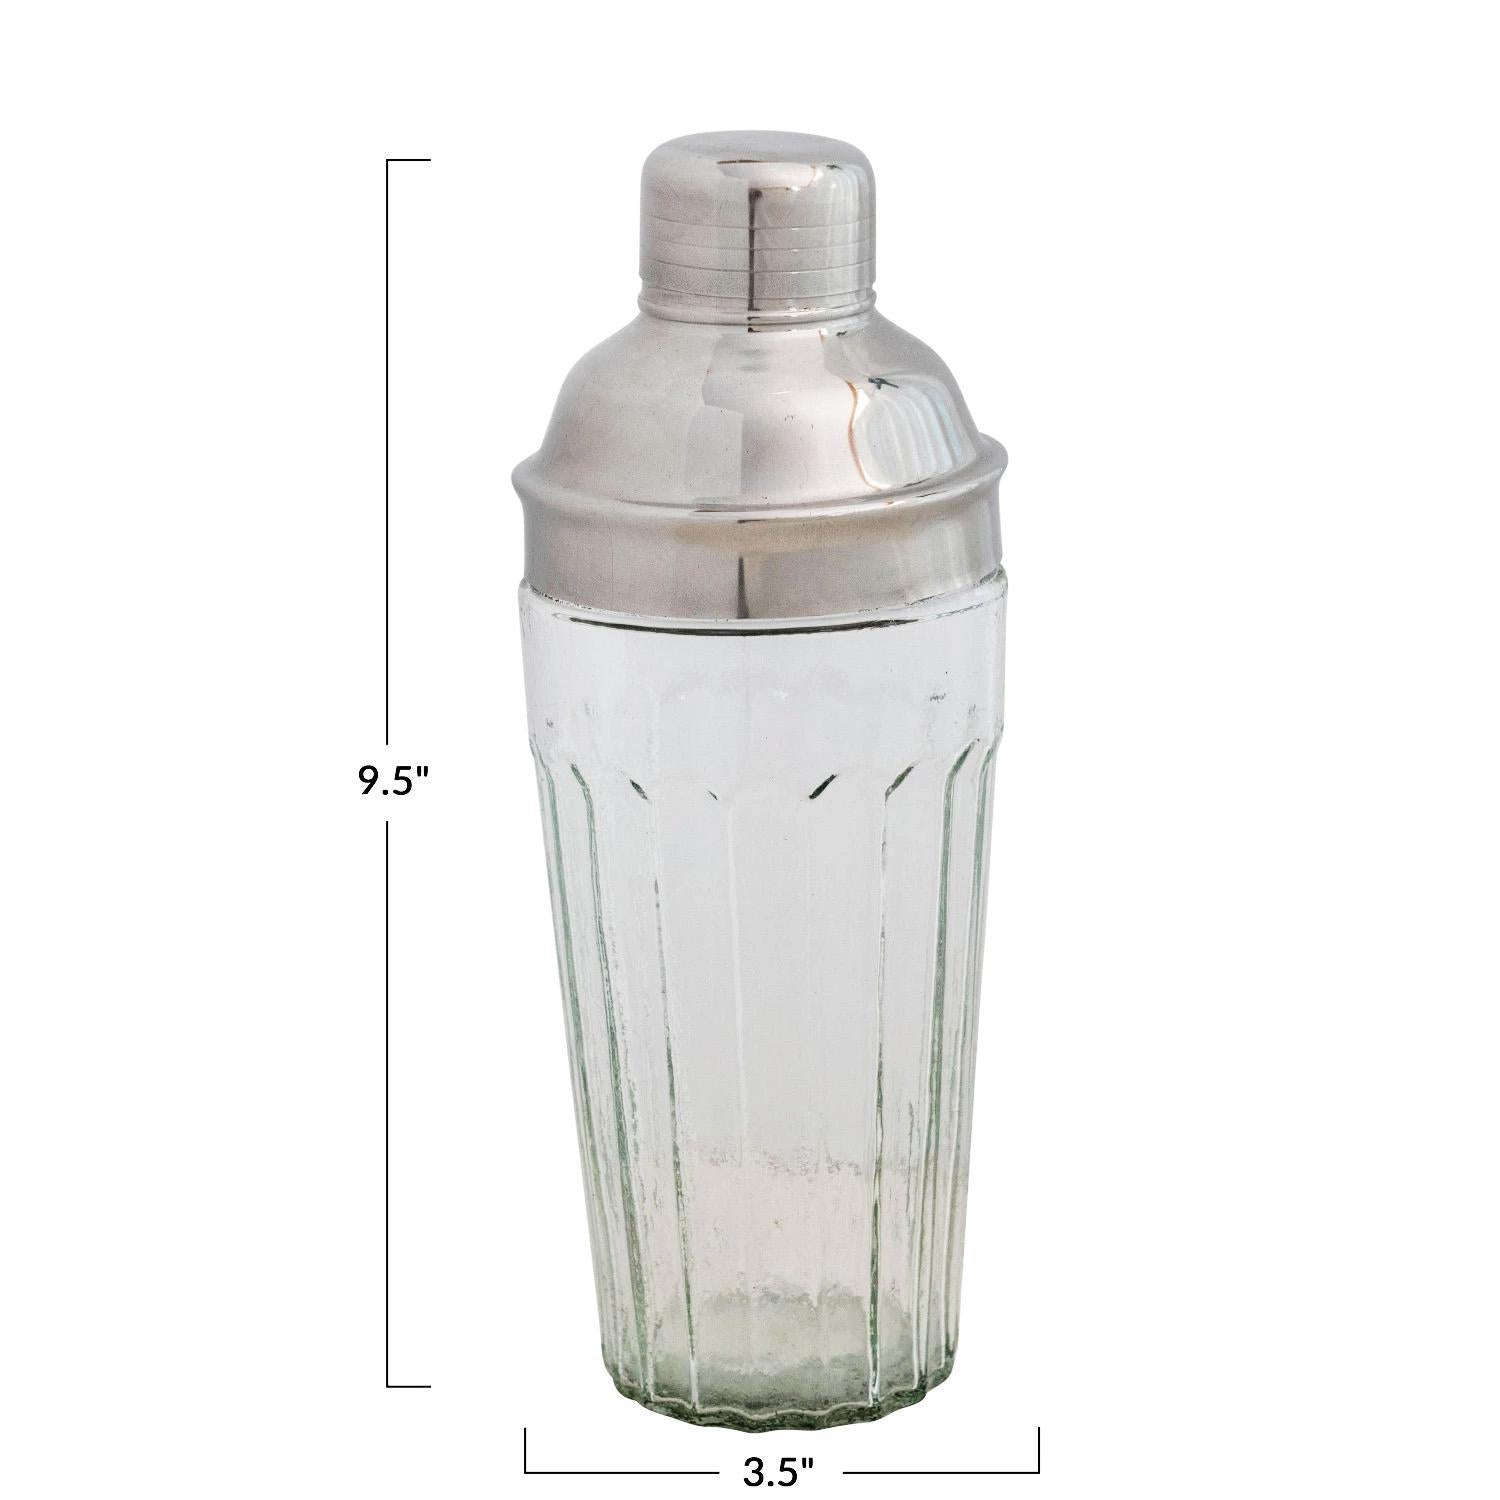 Glass Cocktail Shaker with Stainless Steel Top showing dimensions 